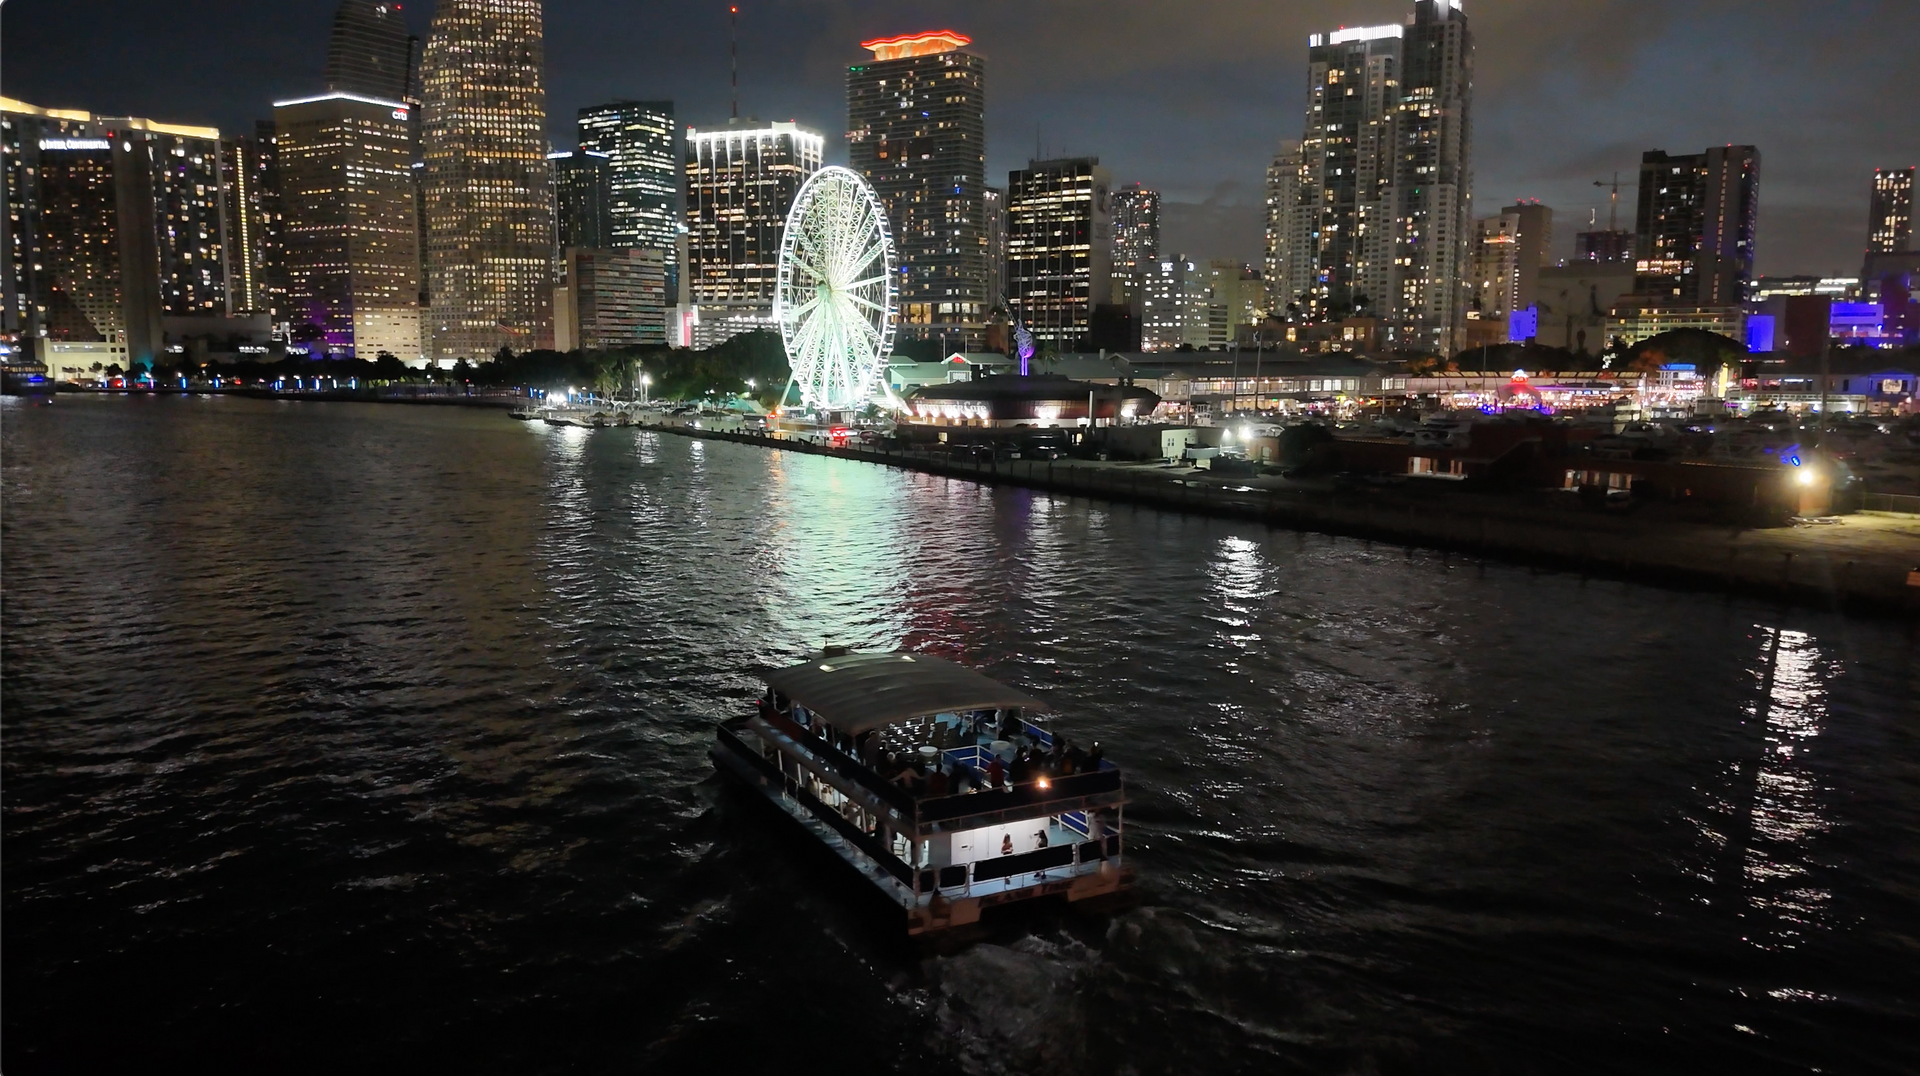 The Miami Skyline is so beautiful at night with amazing views, there are plenty of great seats to enjoy the views from on both the upper and lower decks  of our Miami Boat cruise, but seats are limited so make sure to book early. Please Note that this is not a party cruise!